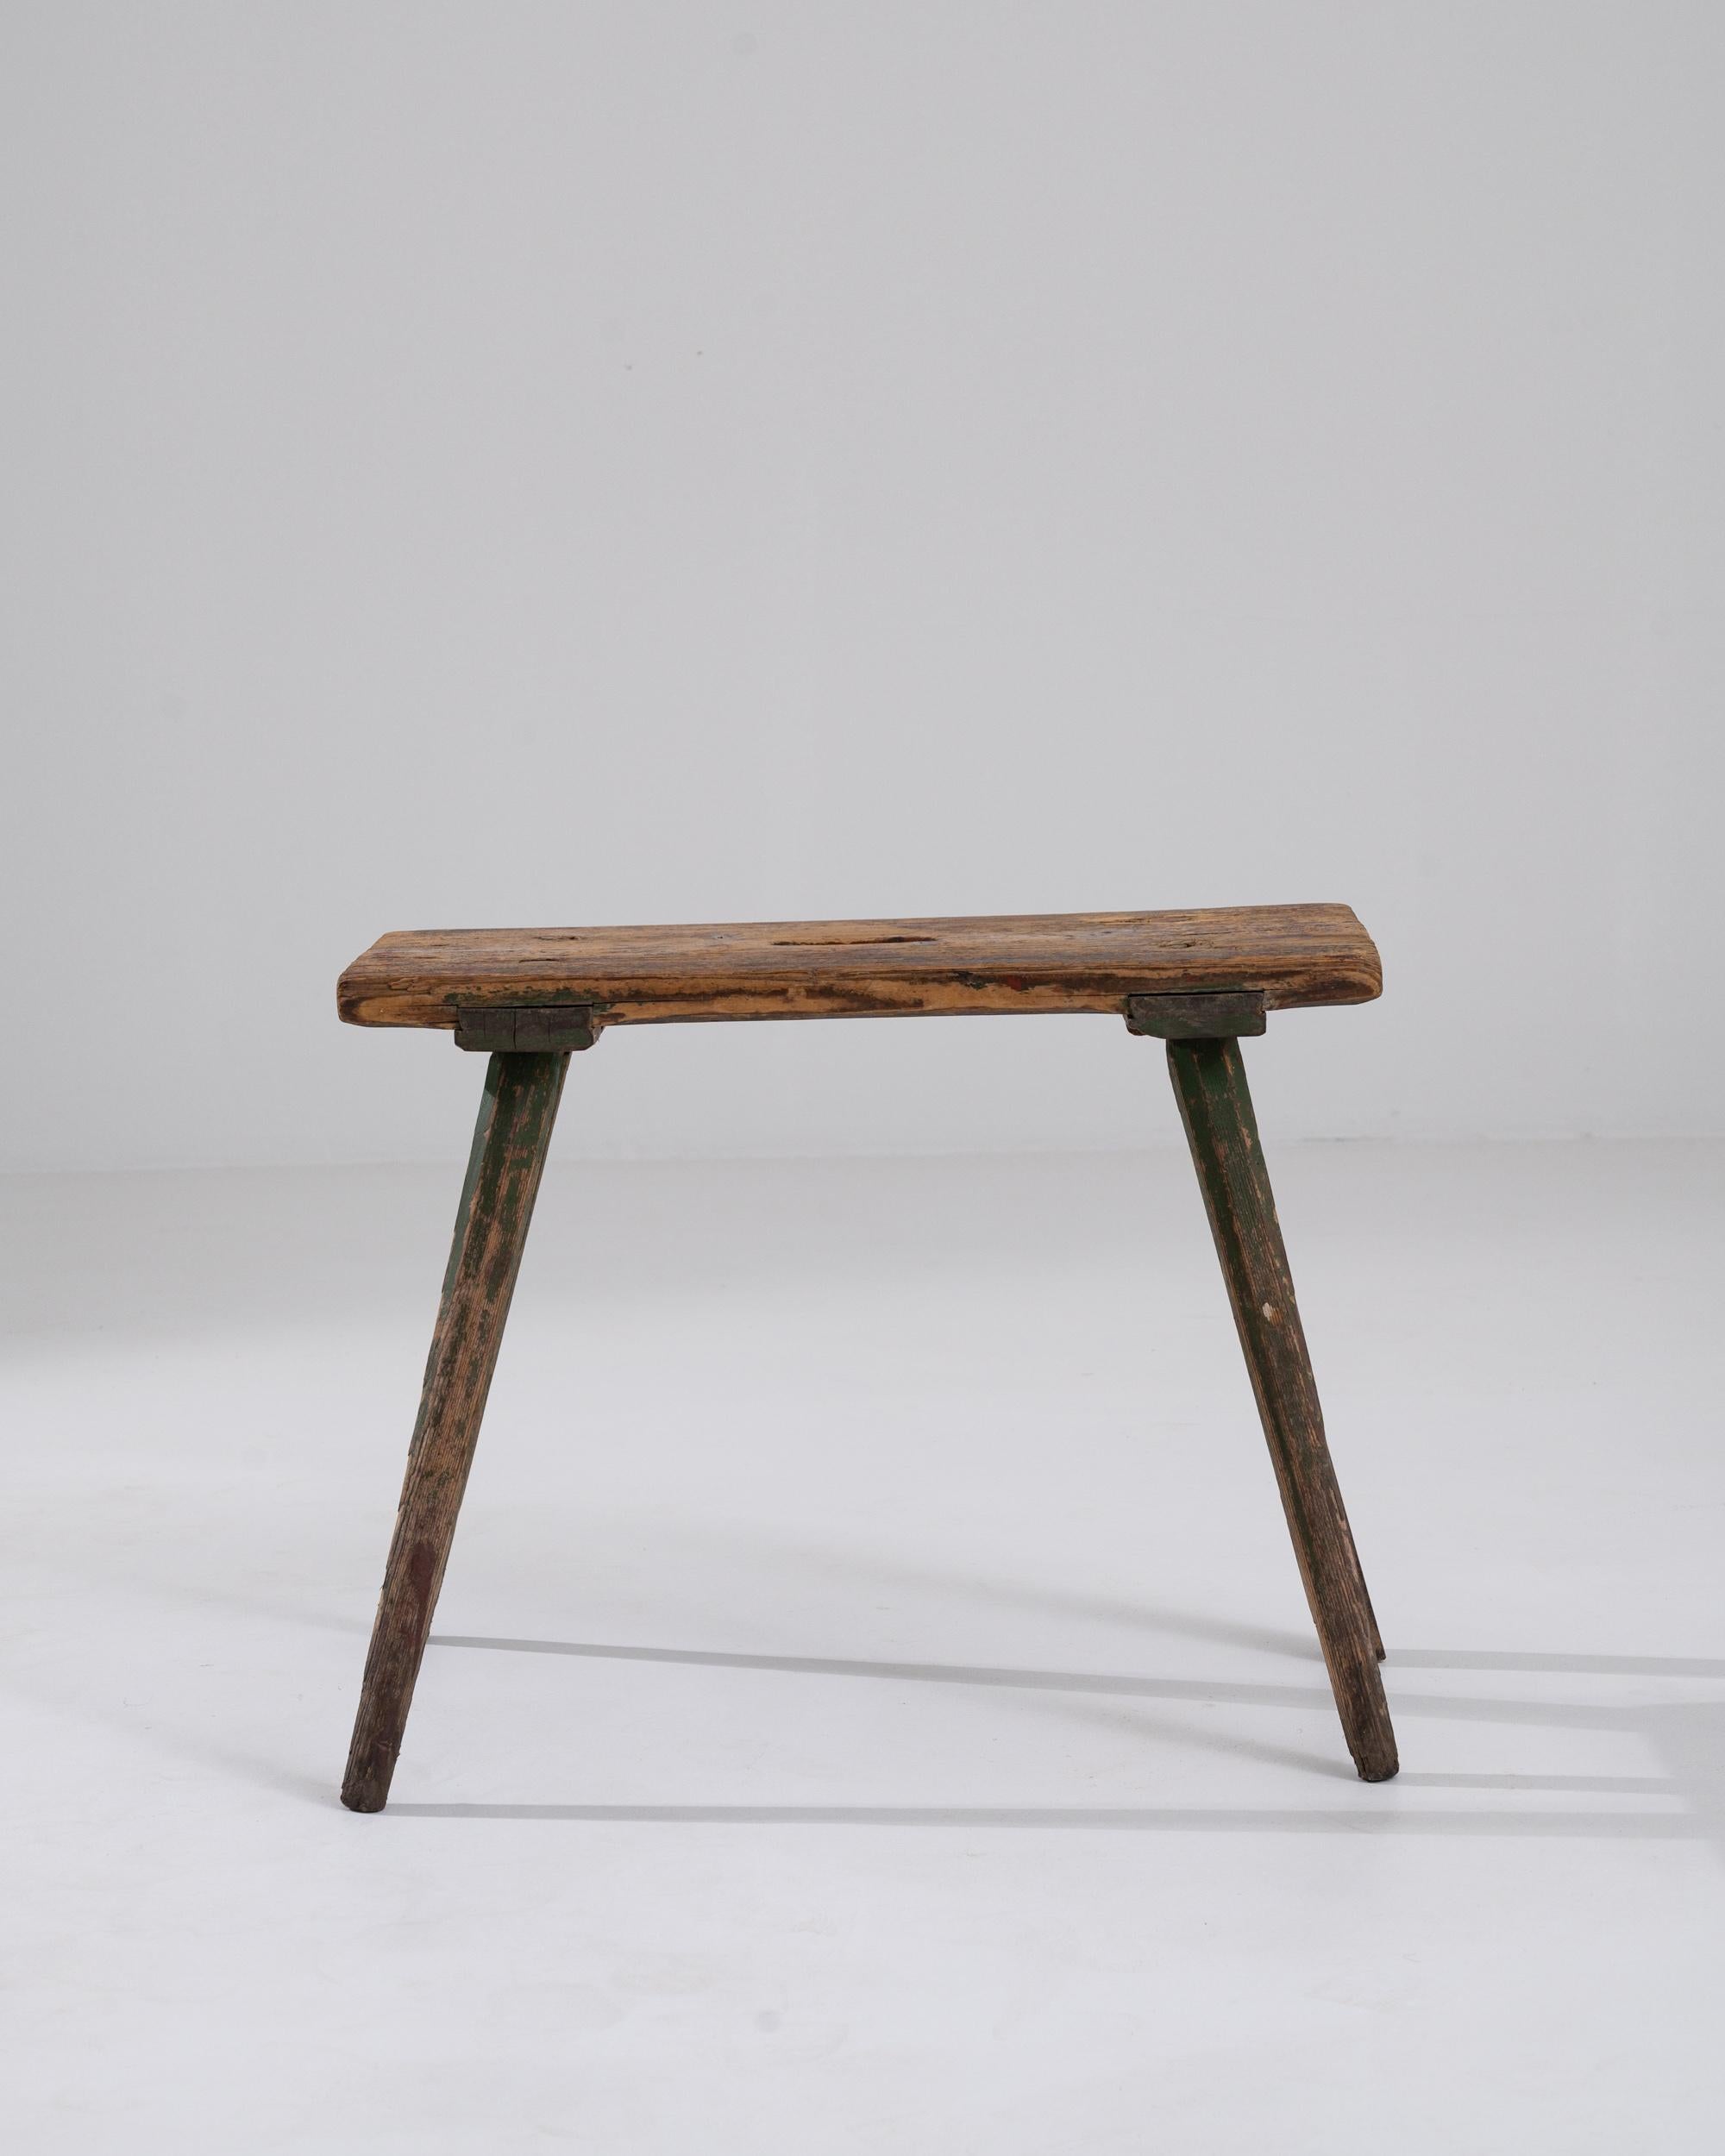 A wooden stool made in 19th century Scandinavia. A simple wooden stool composed of one seat plank and four diagonal legs, all of which have been slowly covered in an earthy patina. The minimalist image of the stool’s form conjures a picture of a